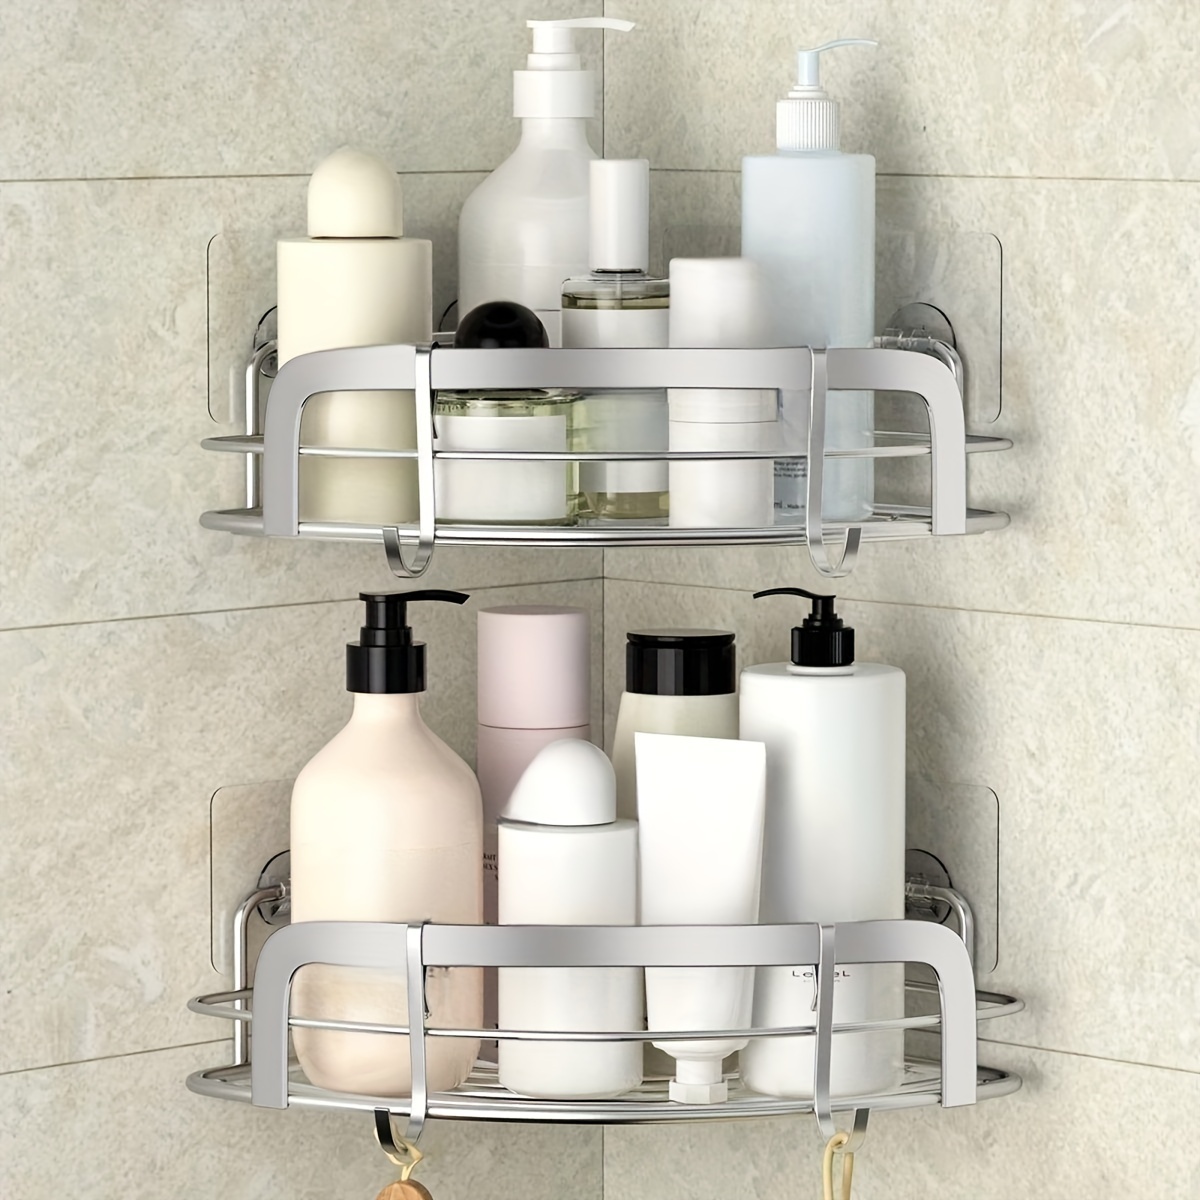 stusgo Shower Caddy, Self-Adhesive Shower Shelves No Drilling 5 Pack  Stainless Steel Bathroom Shower Caddy Wall Mounted Large Capacity Shower  Shelf